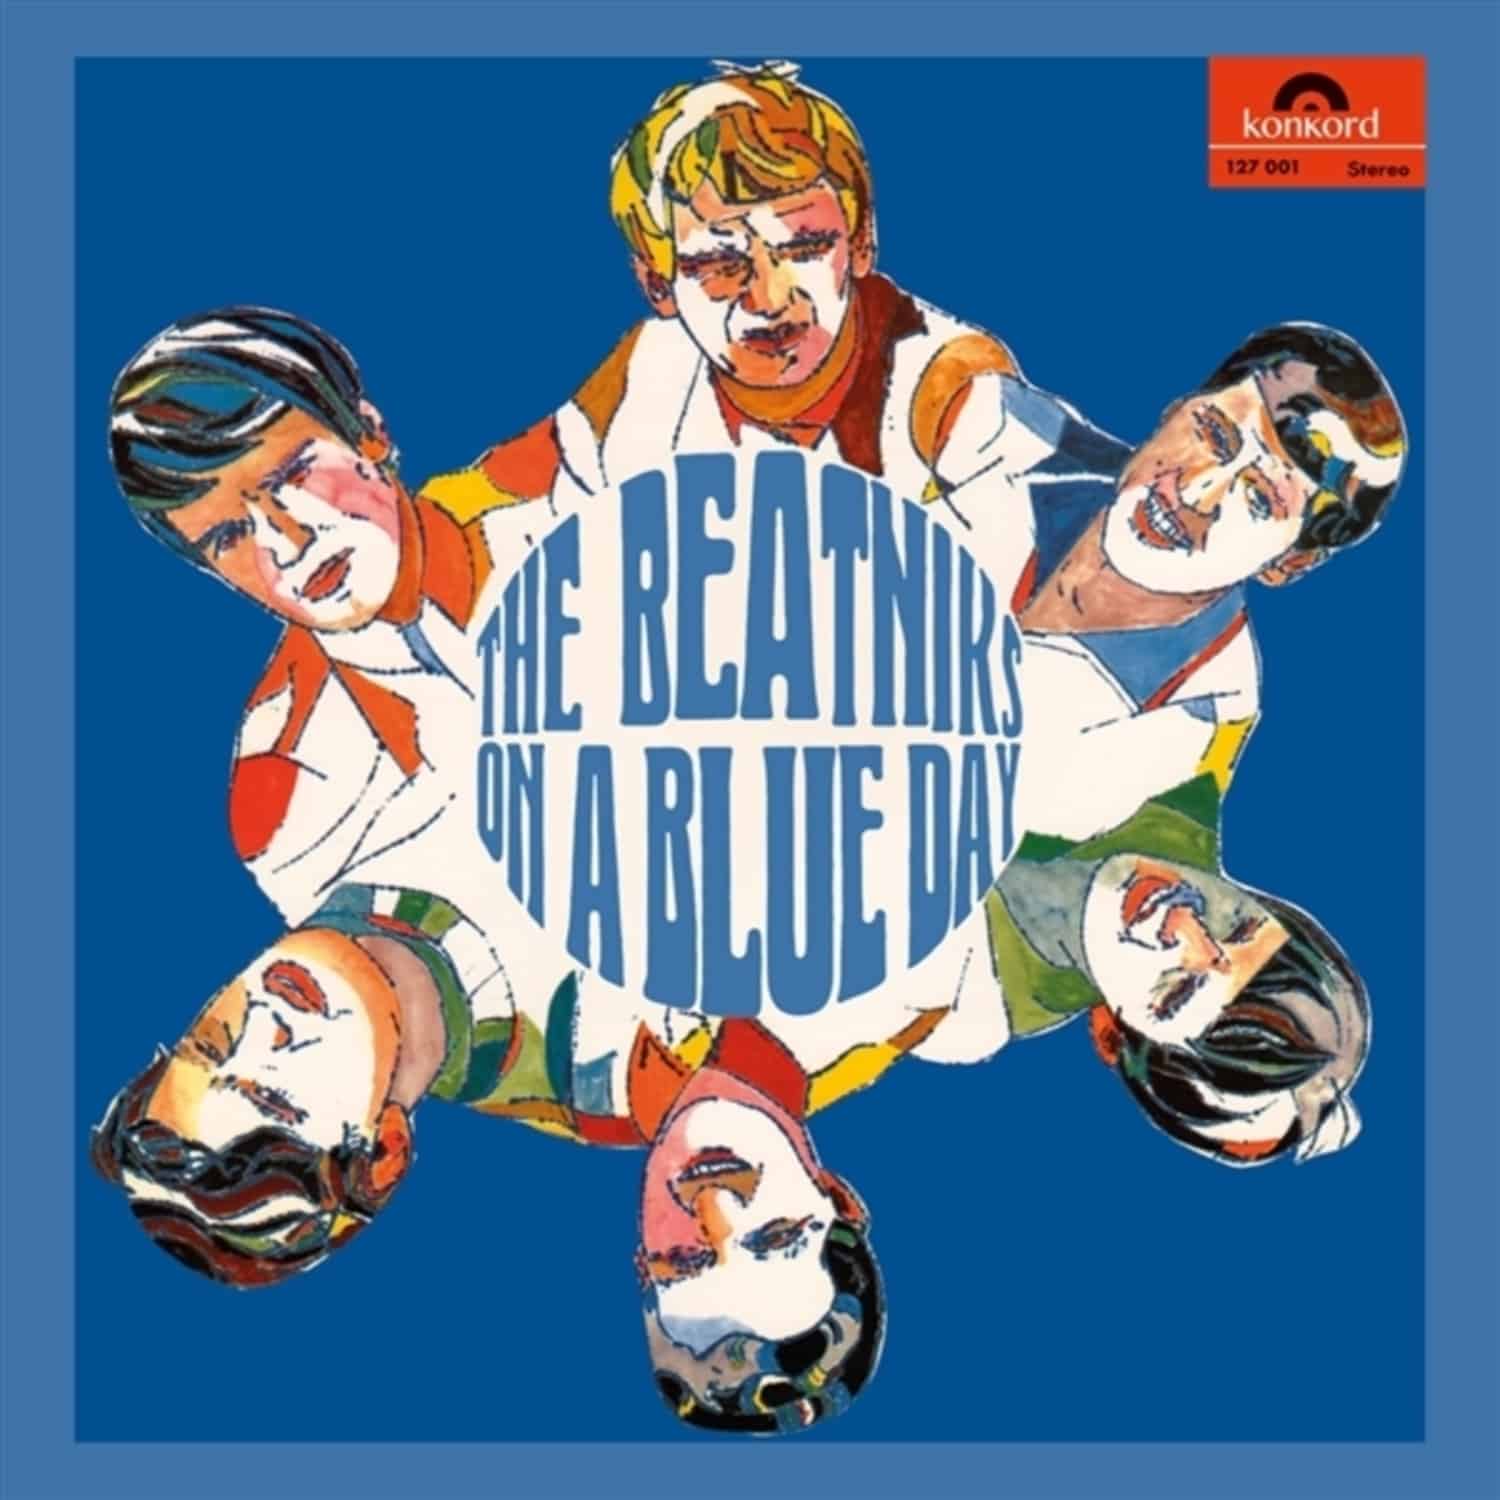 The Beatniks - ON A BLUE DAY 